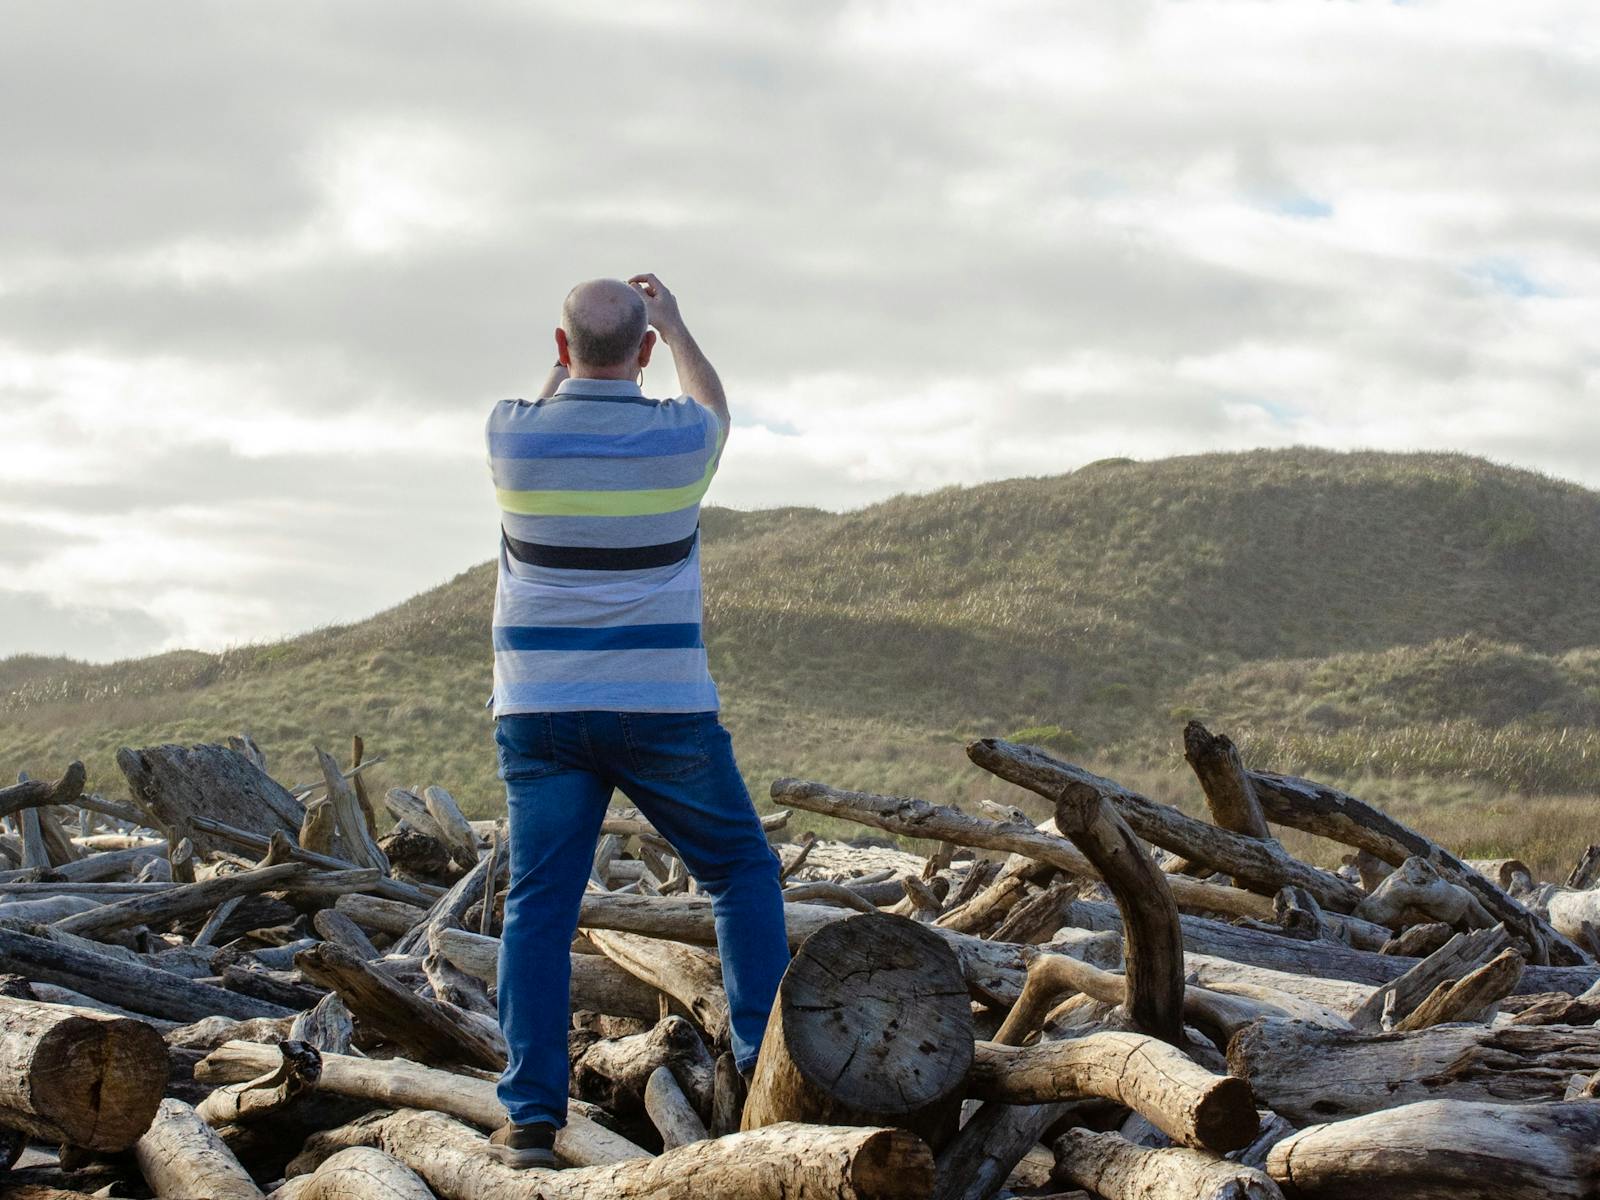 Man standing on large driftwood taking a photo of the scene of drift wood and hills in front of him